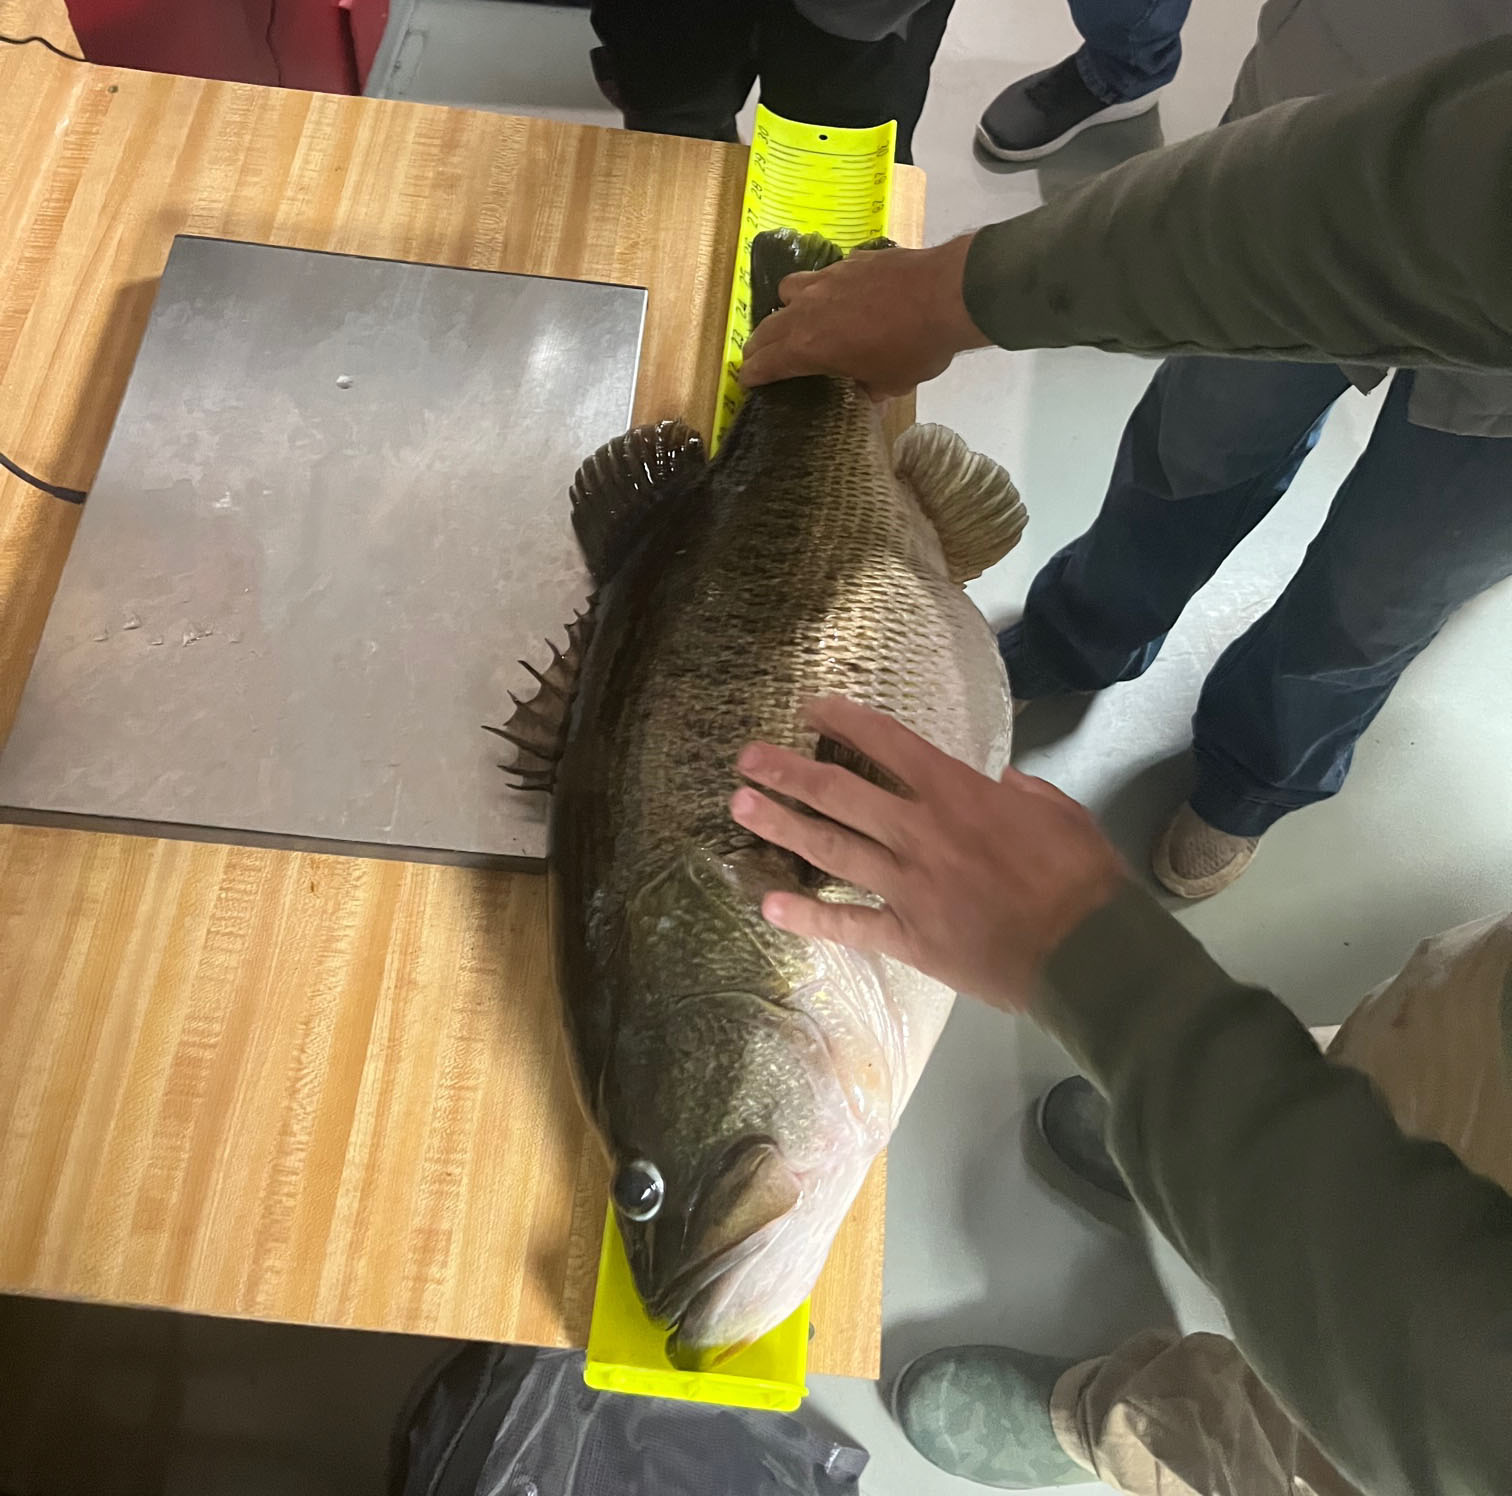 Texas fishing guide catches 8th heaviest largemouth bass in state history